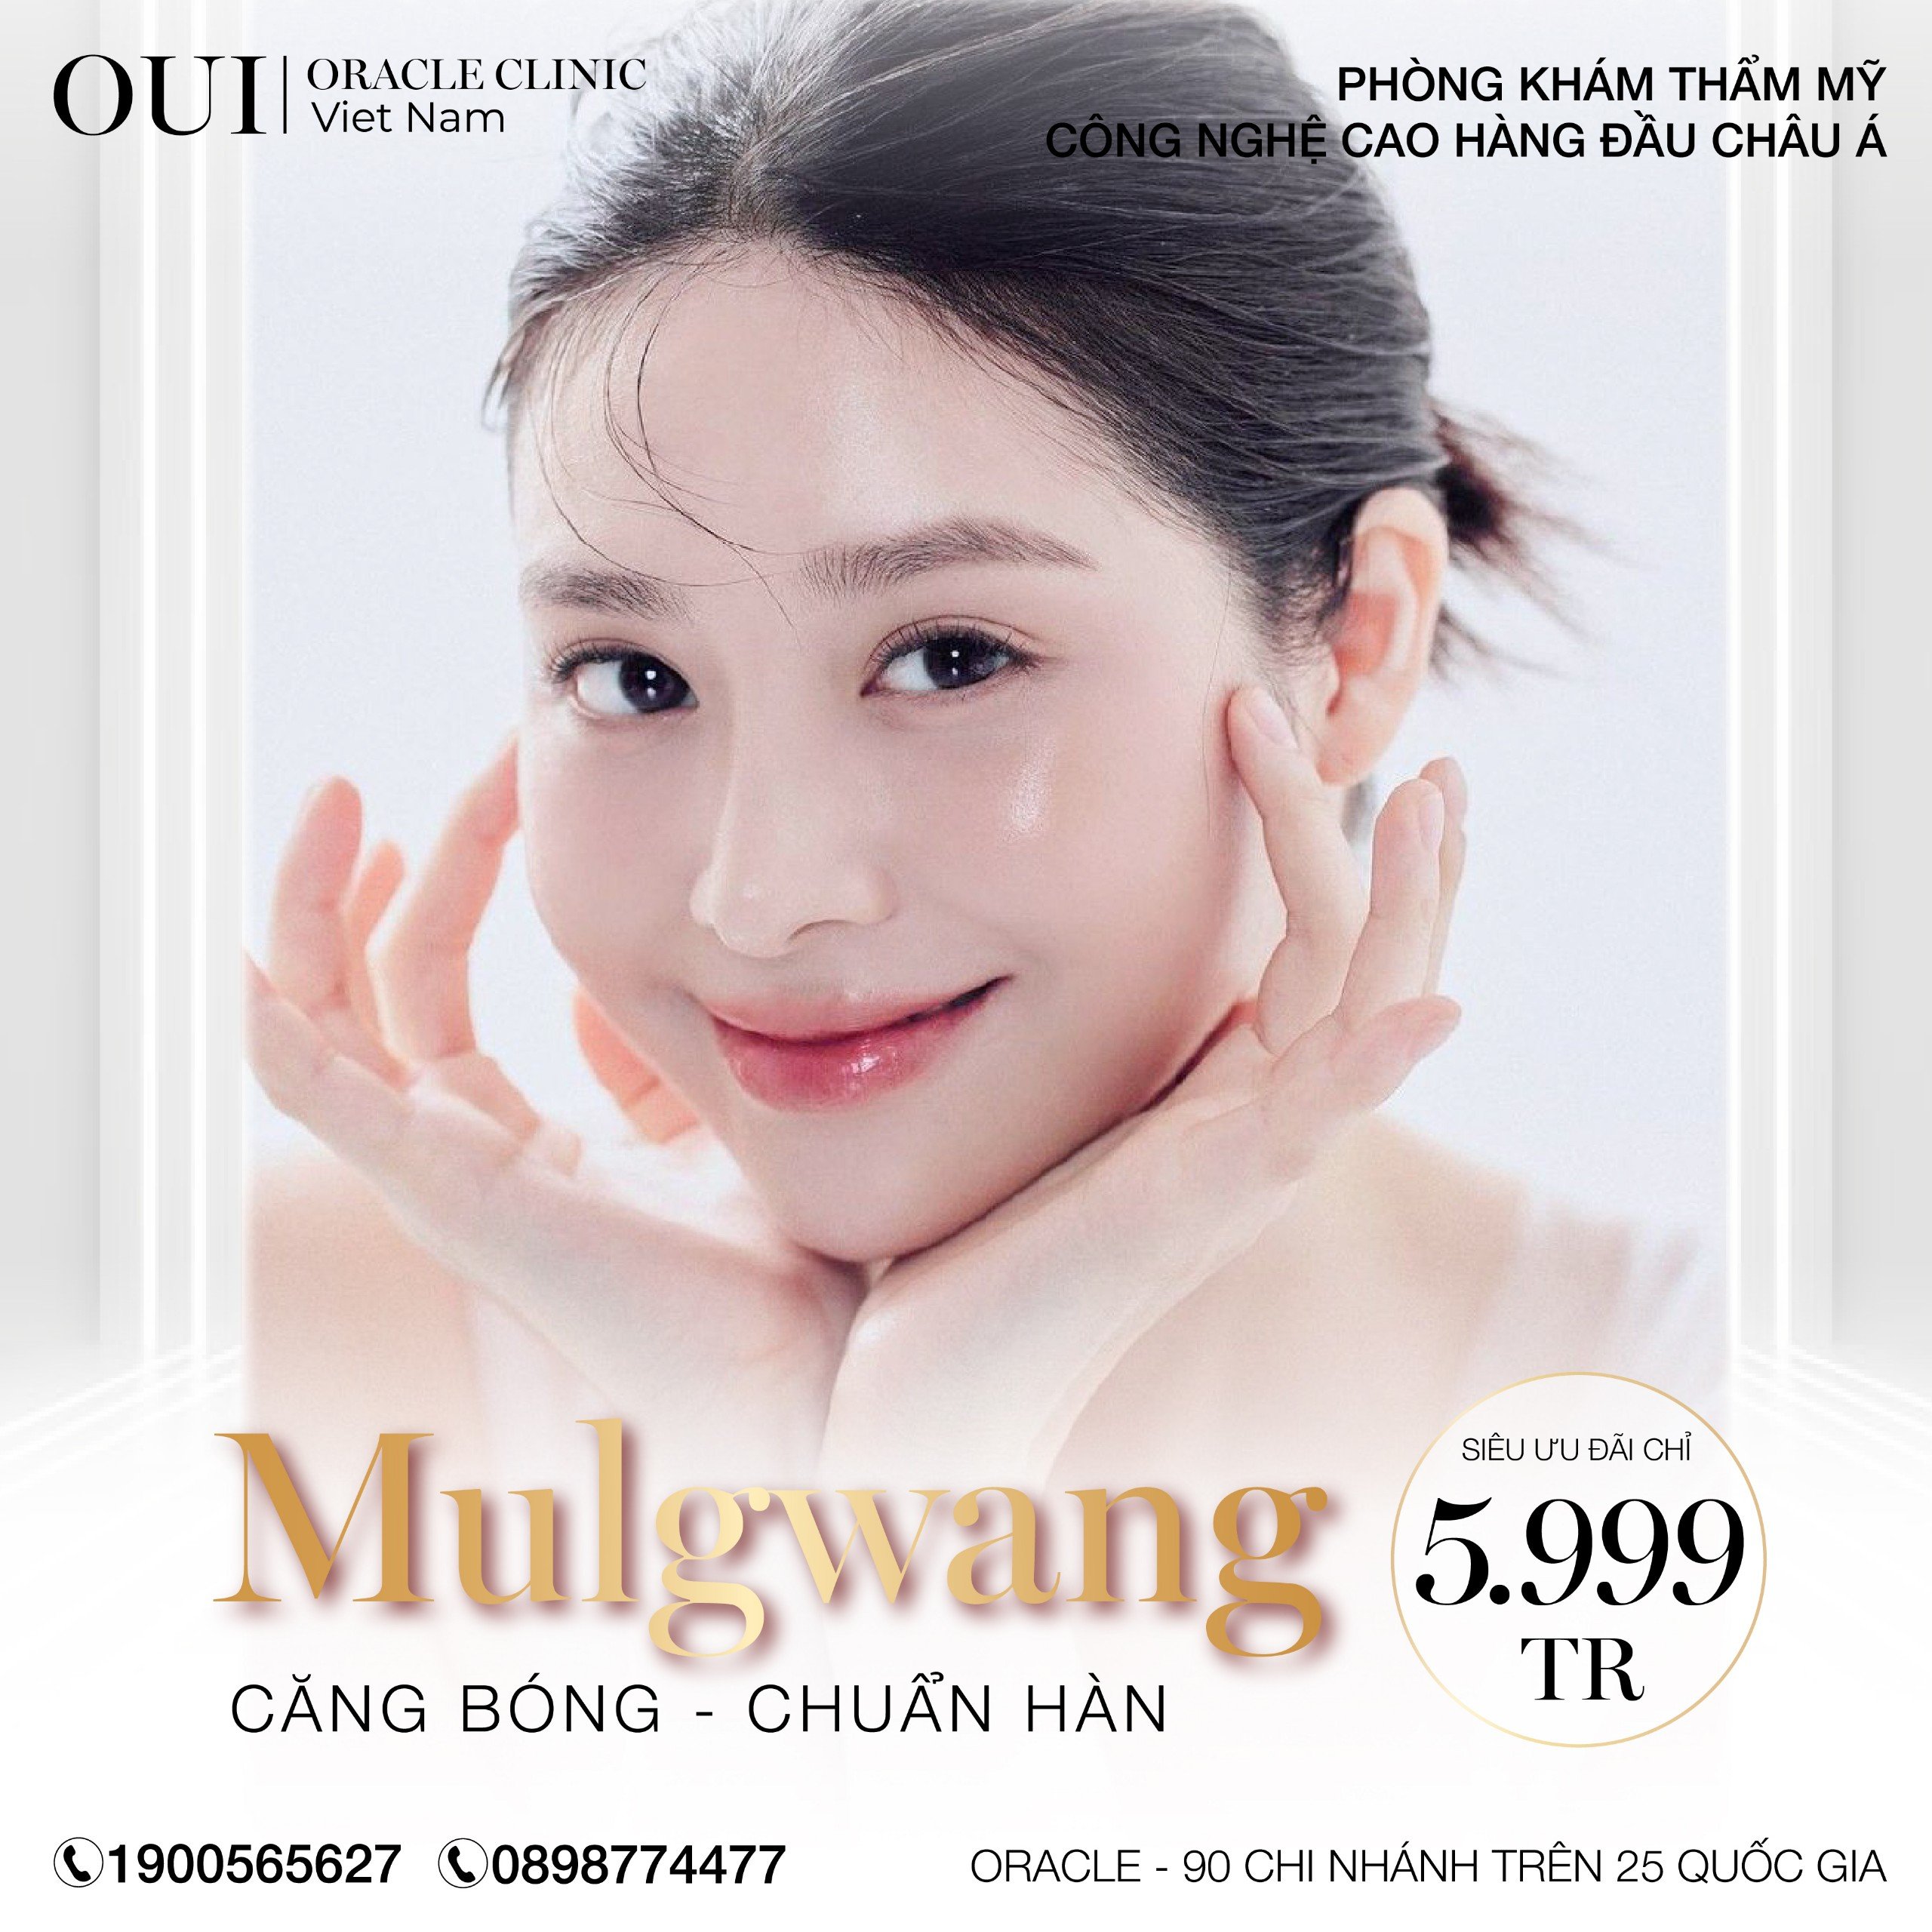 ✨GET GLOWING SKIN AFTER JUST 1 MULGWANG TREATMENT FROM KOREA